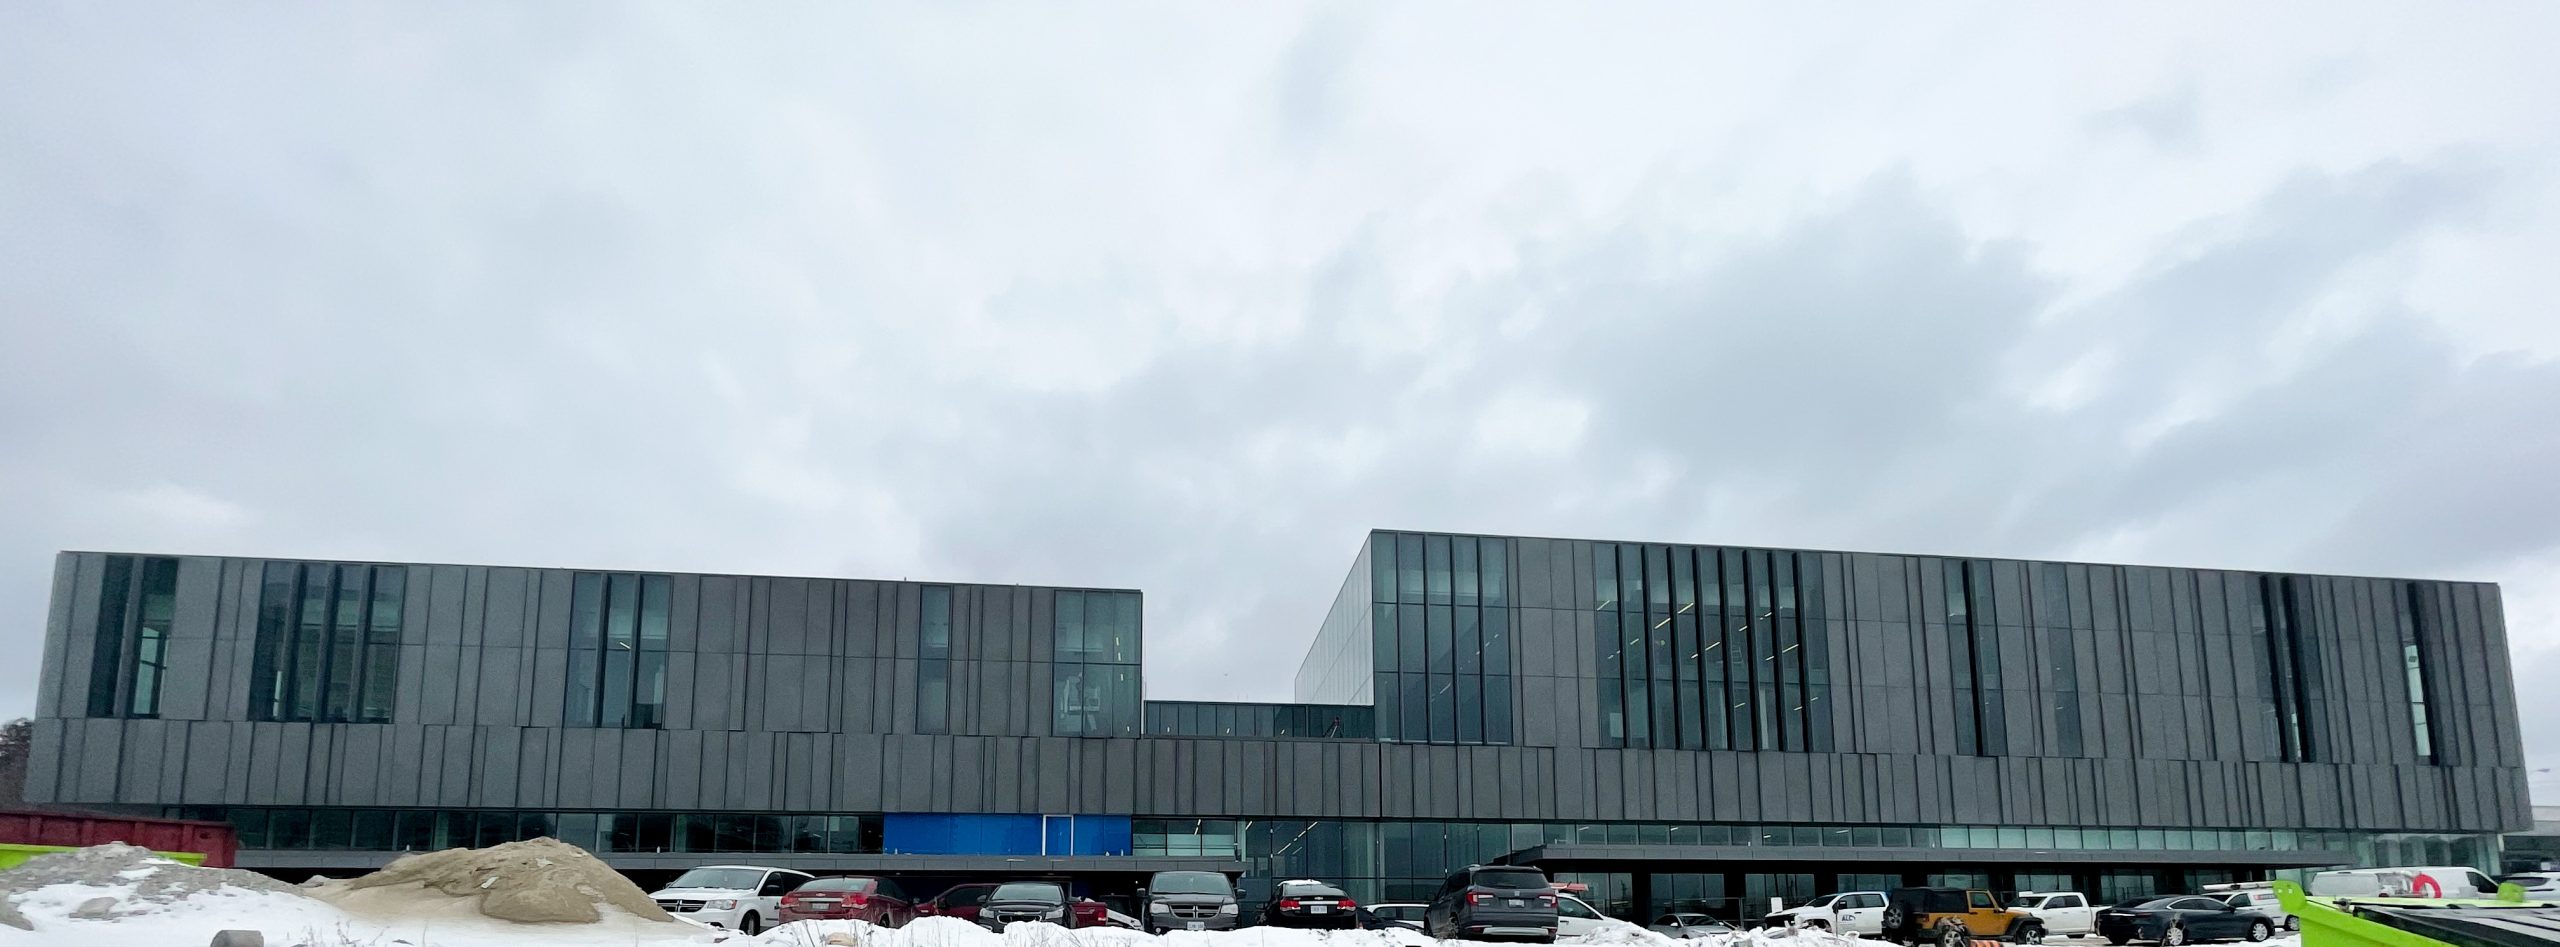 A photograph of the exterior of the new Ethennonnhawahstihnen' Community Recreation Centre & Library which shows a long rectangular multi-floor building with tall glass window panels and dark grey panels. 